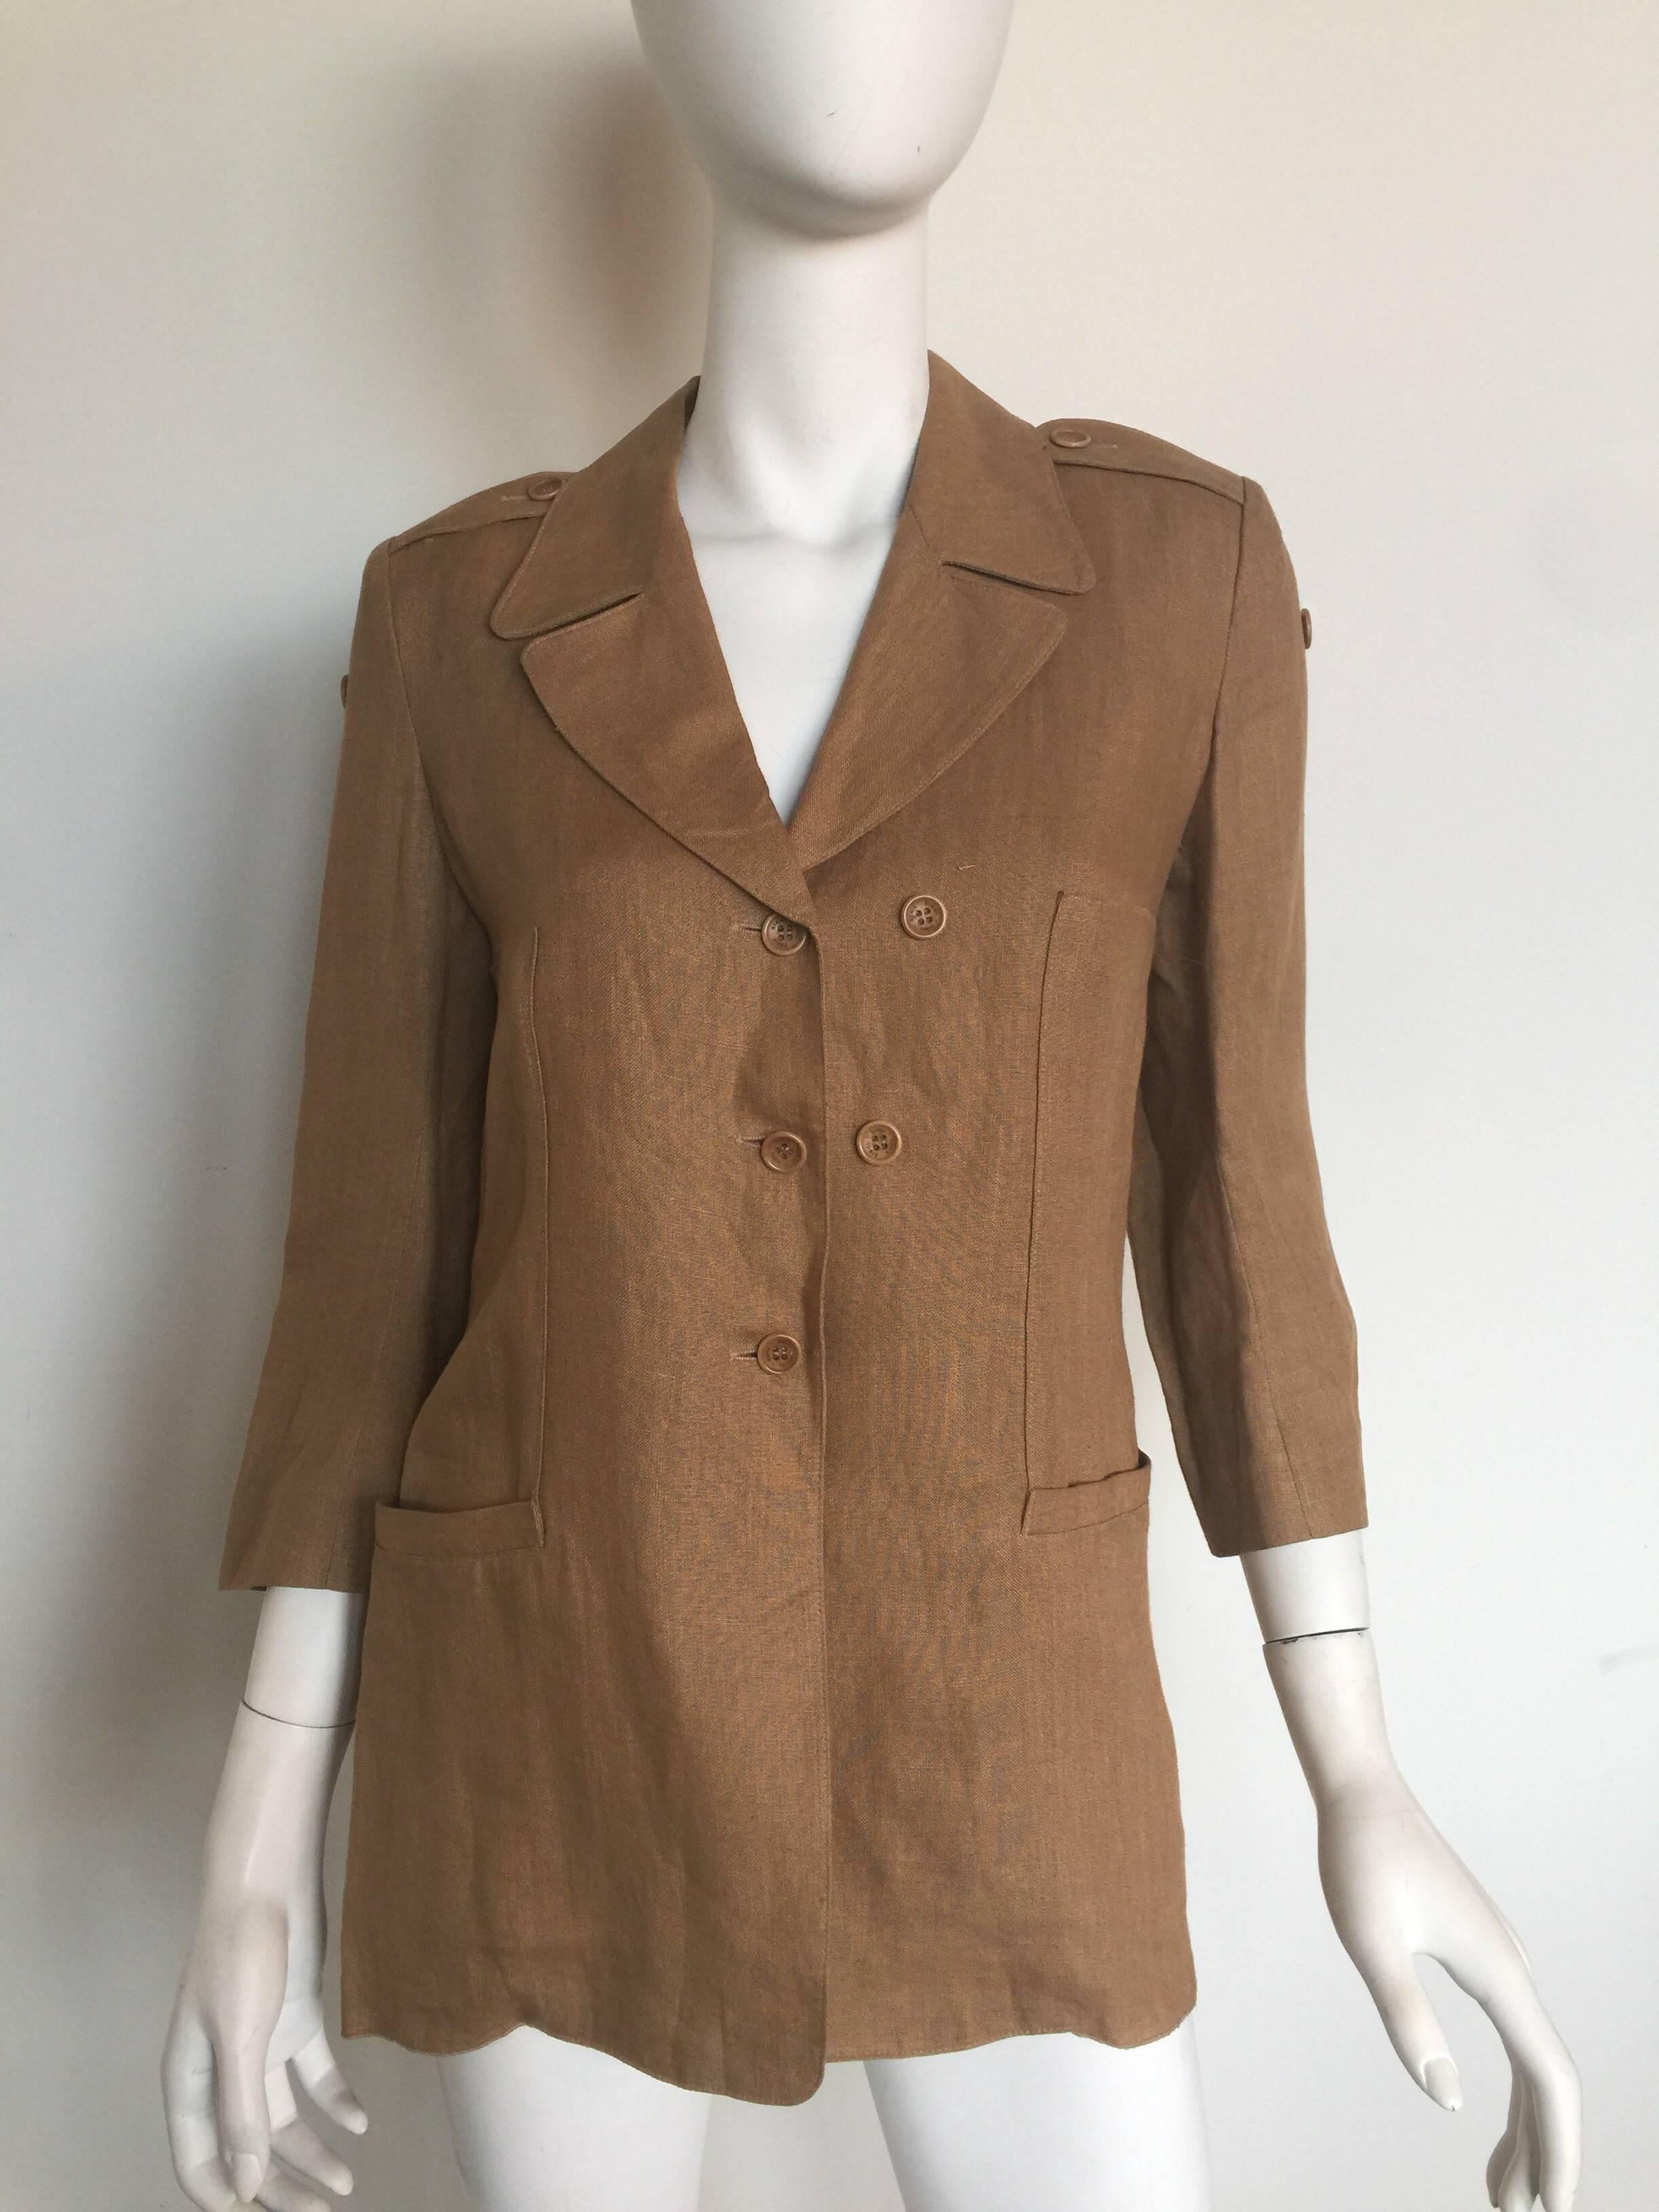 This camel linen blazer is Sonia Rykiel from the 1980s.  It is in great condition with two front pockets and original stamped buttons.  It is listed as a size 38 but please check measurements. 